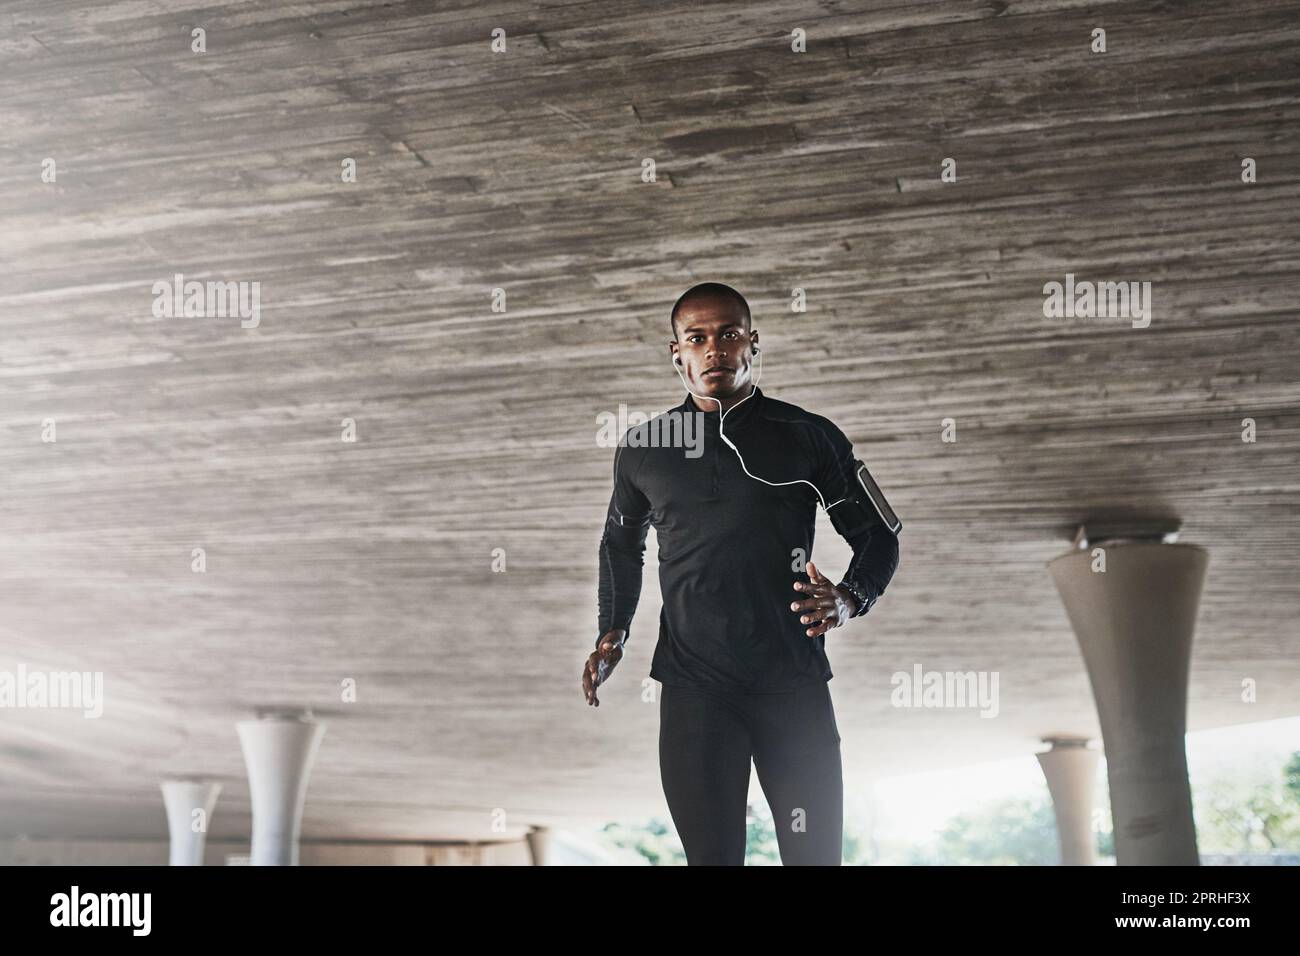 The city is my gym. a young person working out in and around the city. Stock Photo